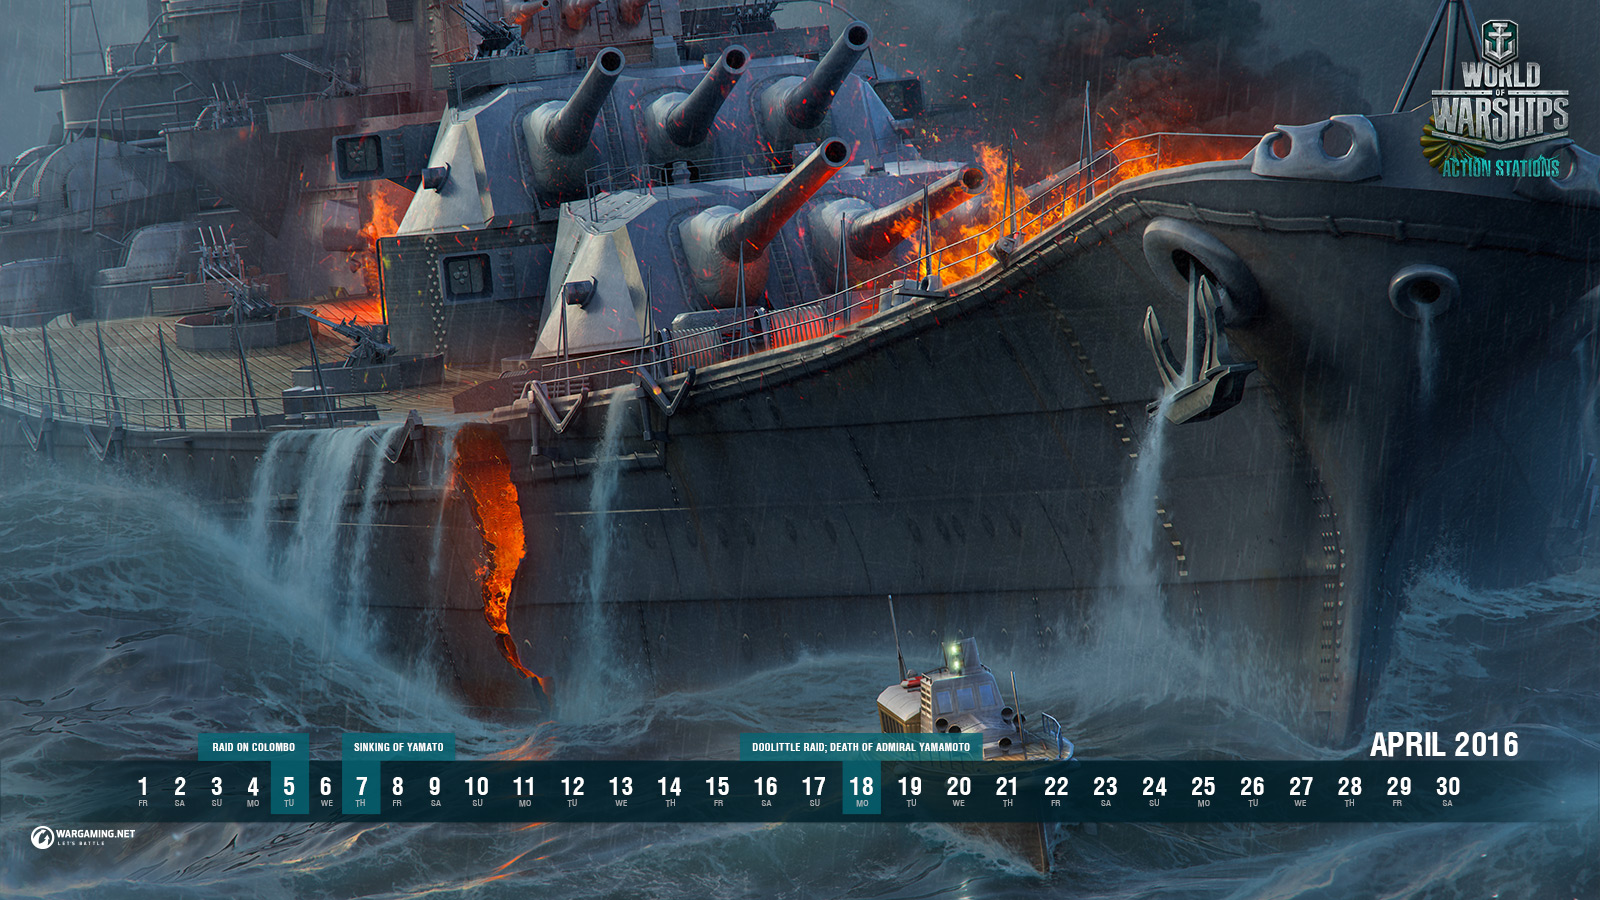 April In Game Events Sinking Of Yamato World Of Warships